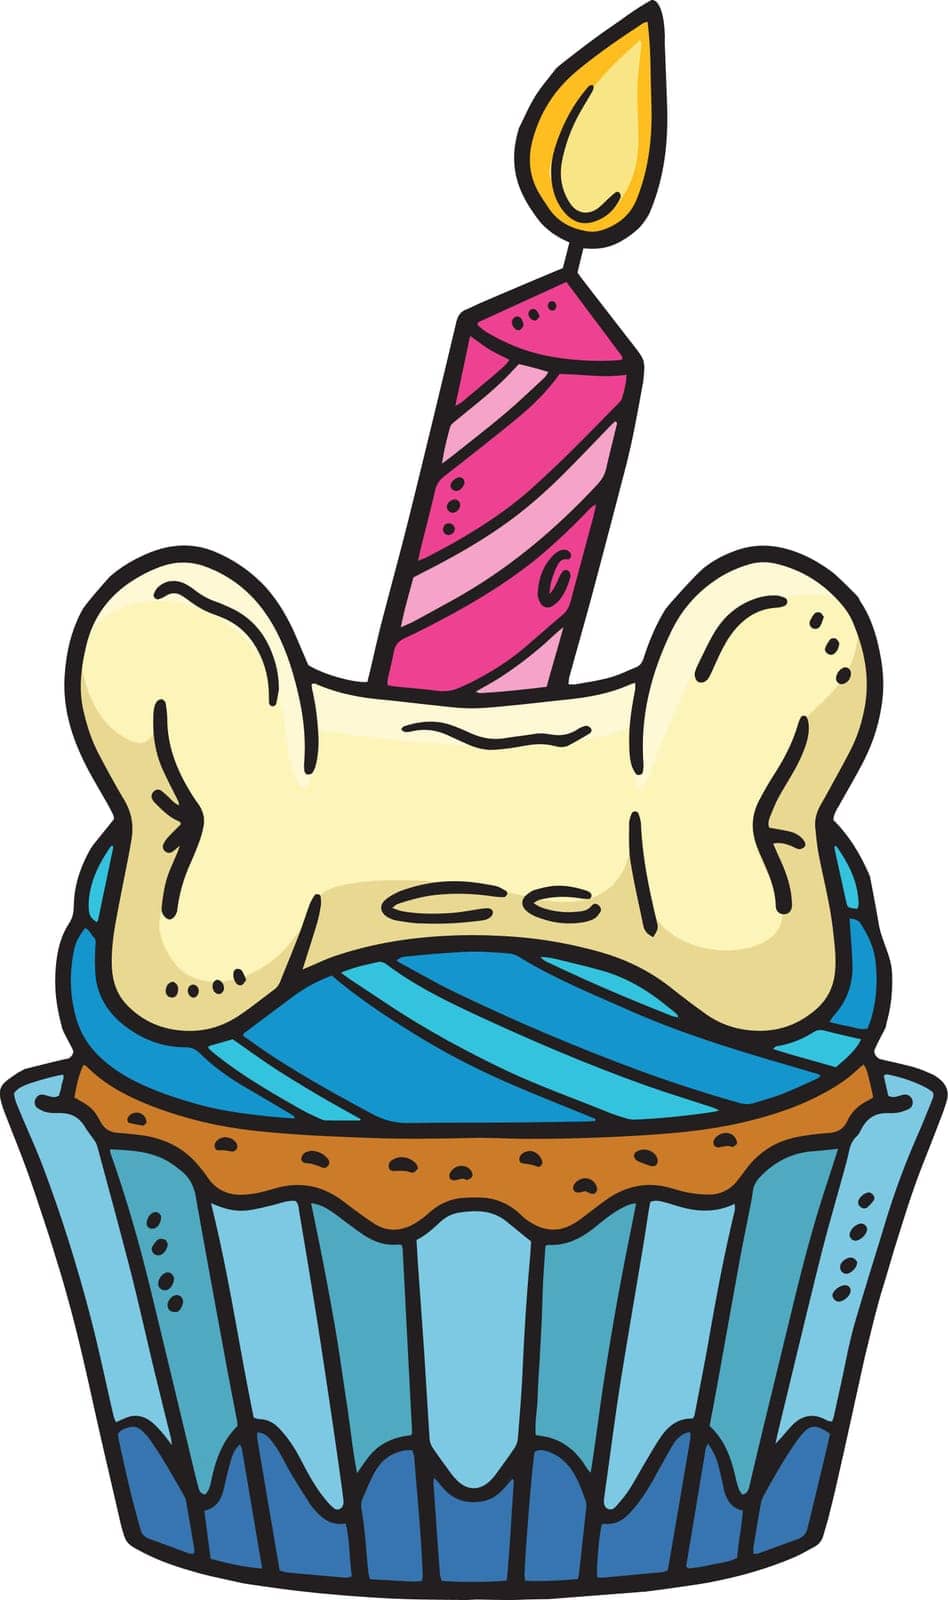 This cartoon clipart shows a Birthday Cupcake with a Candle illustration.